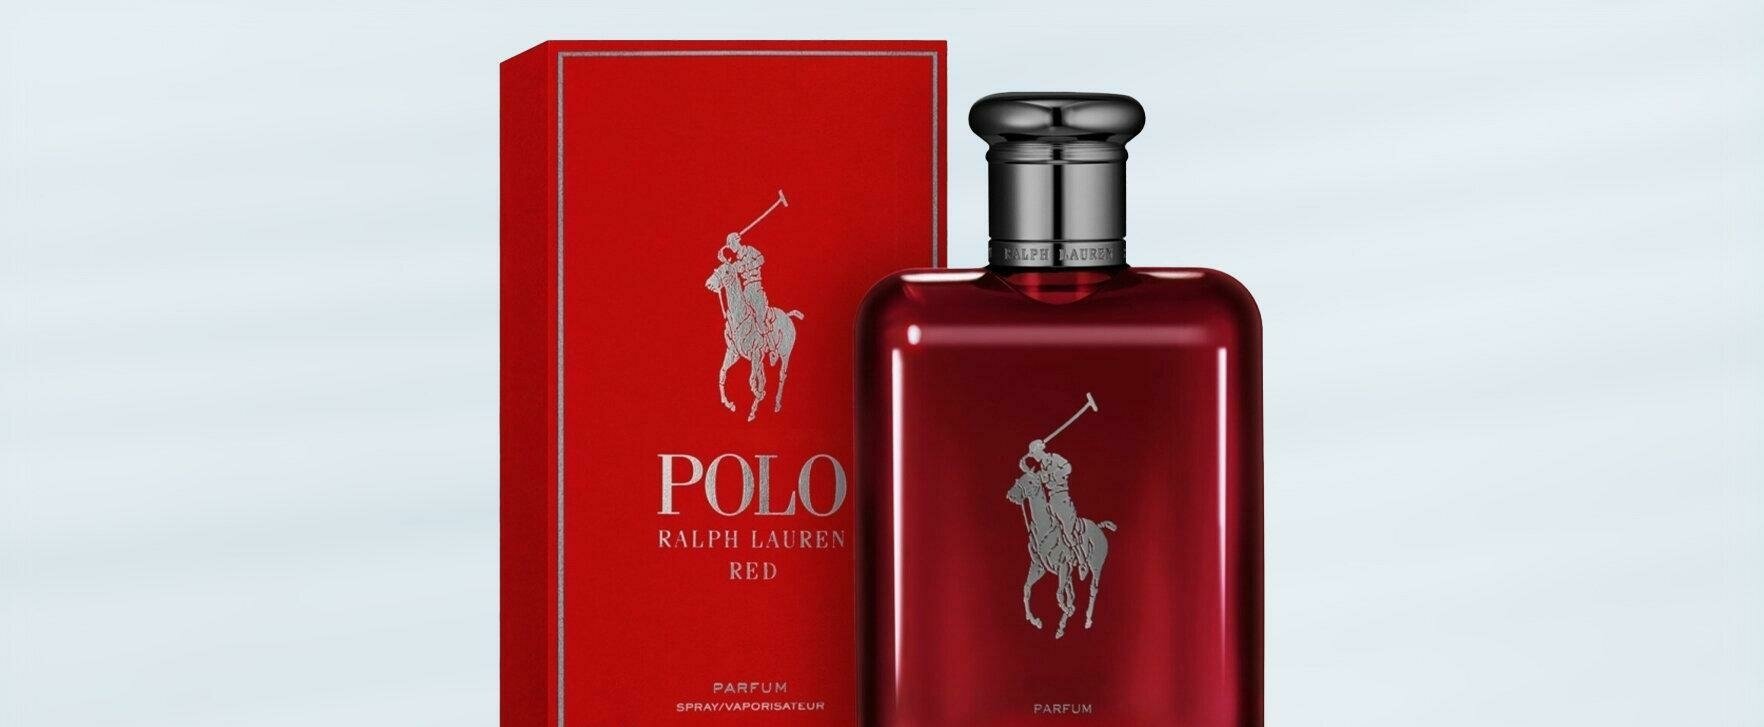 Sporty Fragrance for the Adventurous: Ralph Lauren Launches “Polo Red Perfume”